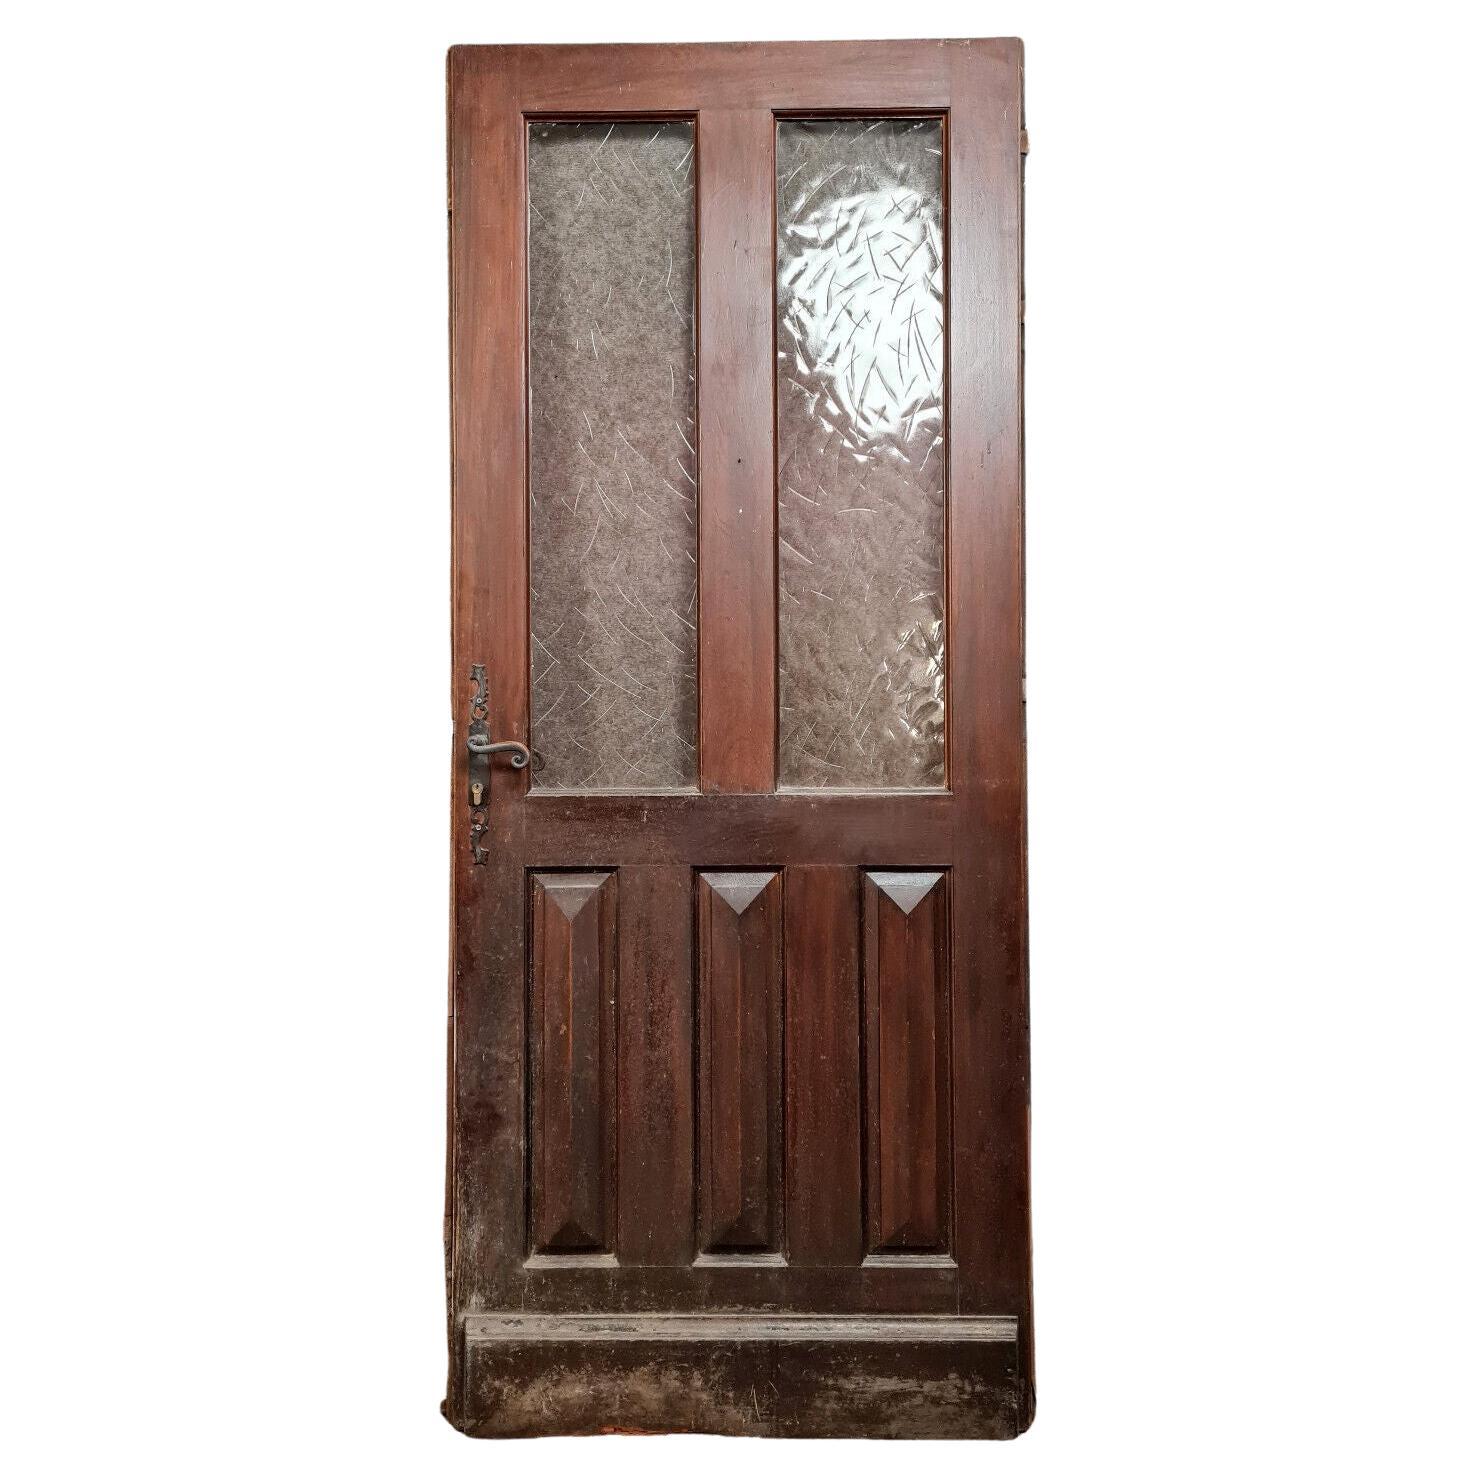 Beautiful Art Deco Solid Wood Door from the 1930s-1940s (Variant A) -1X51